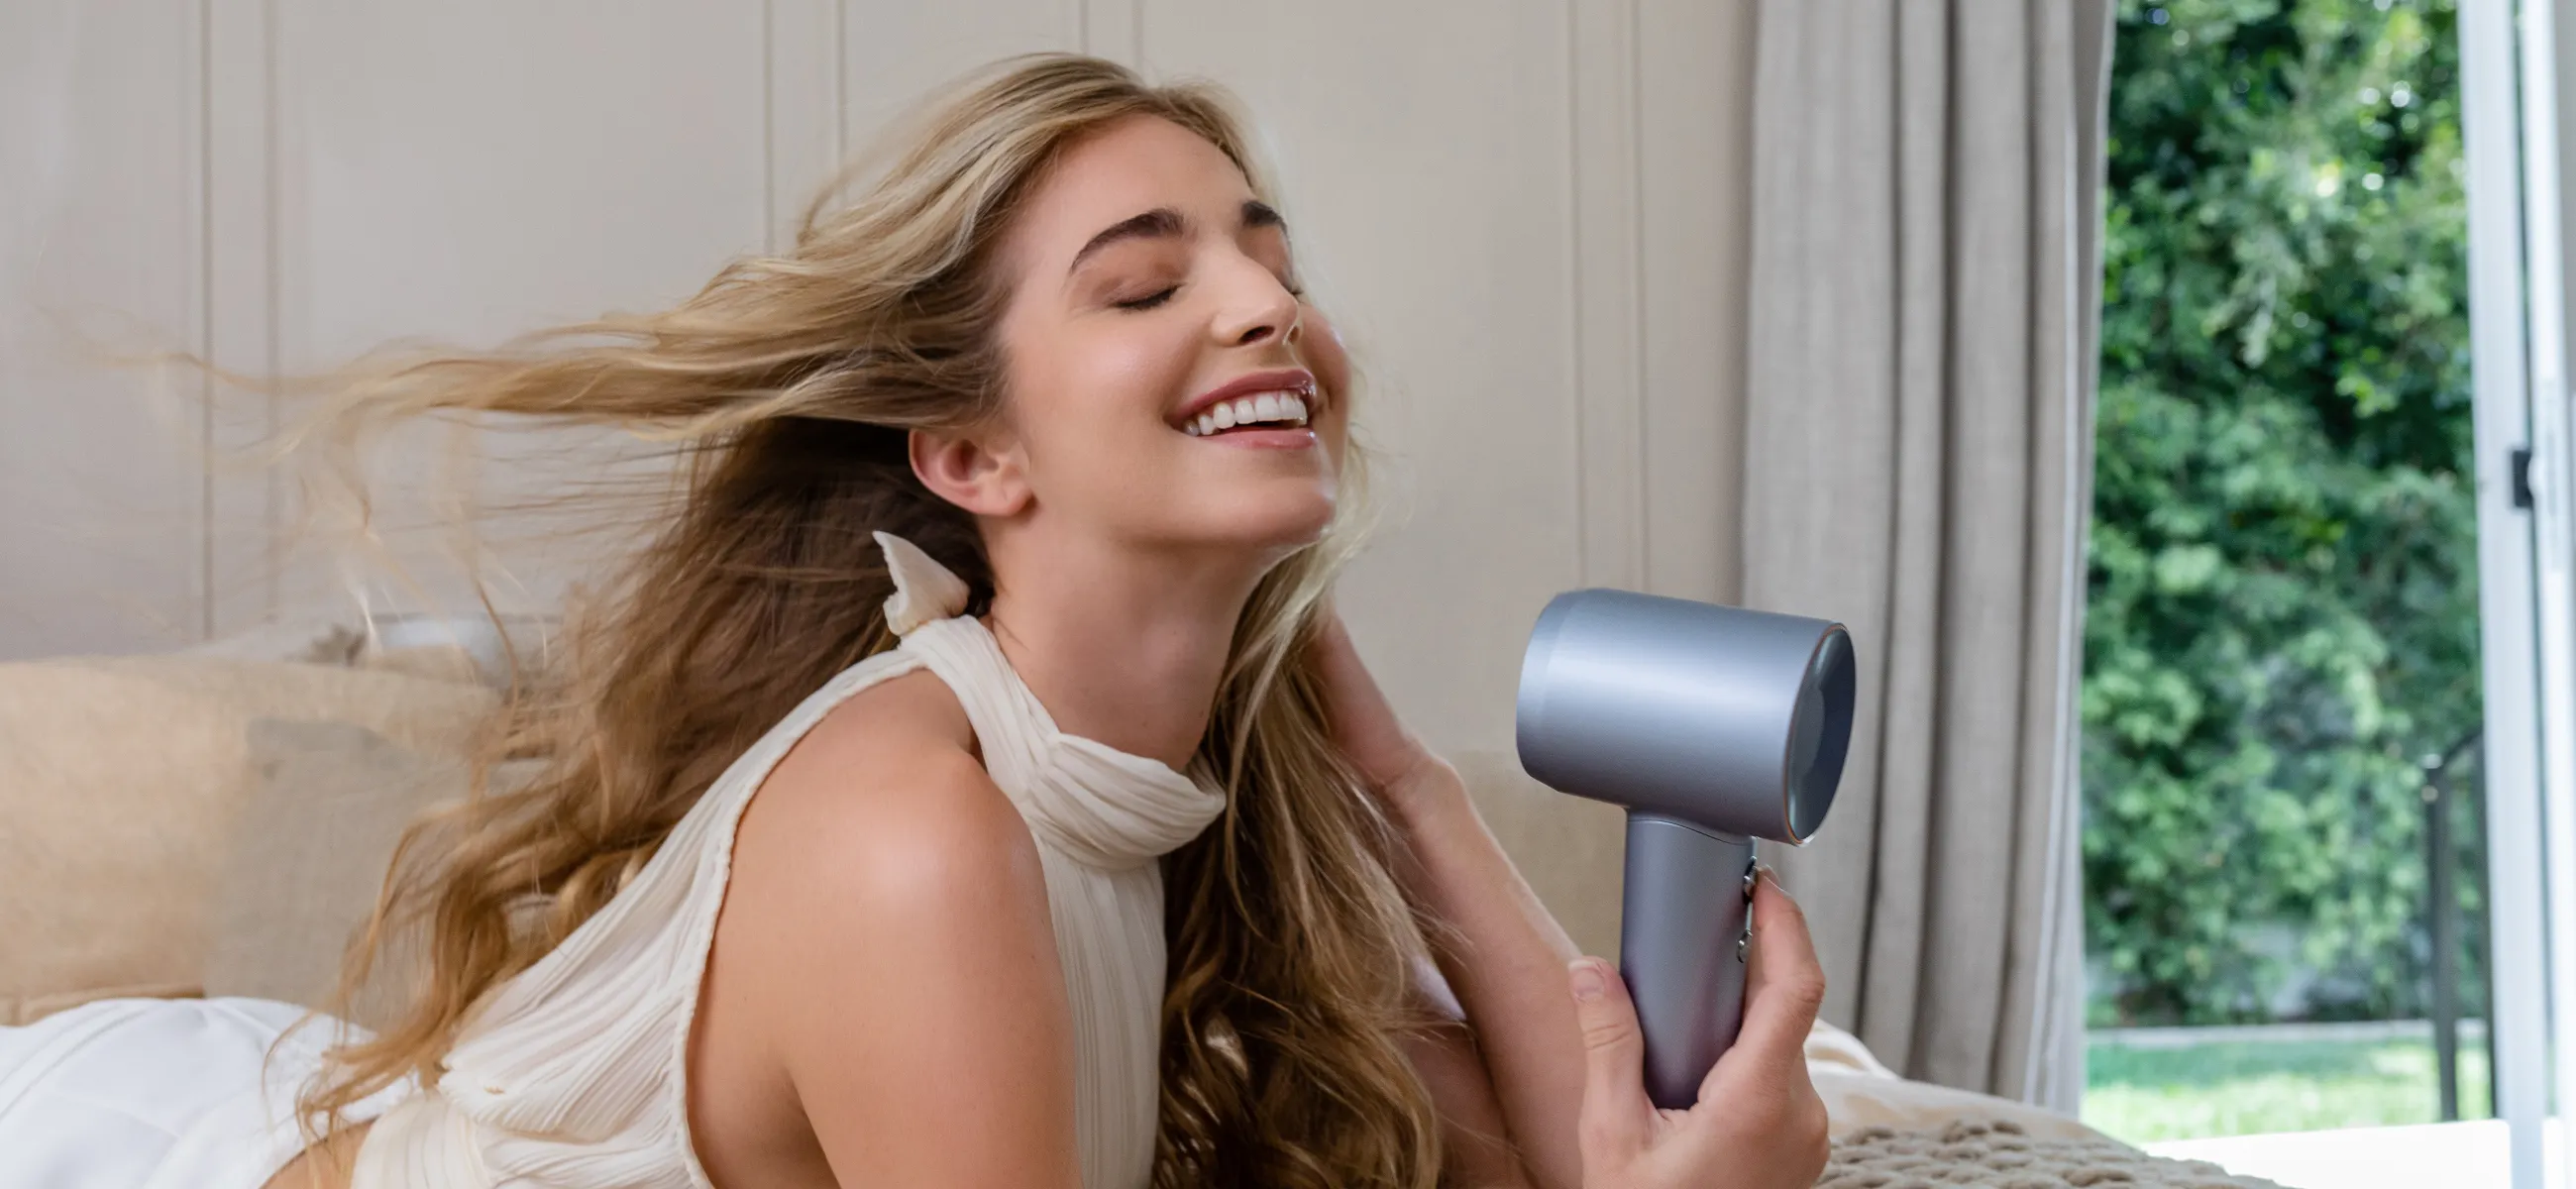 Woman drying her wavy hair with a metallic hair dryer